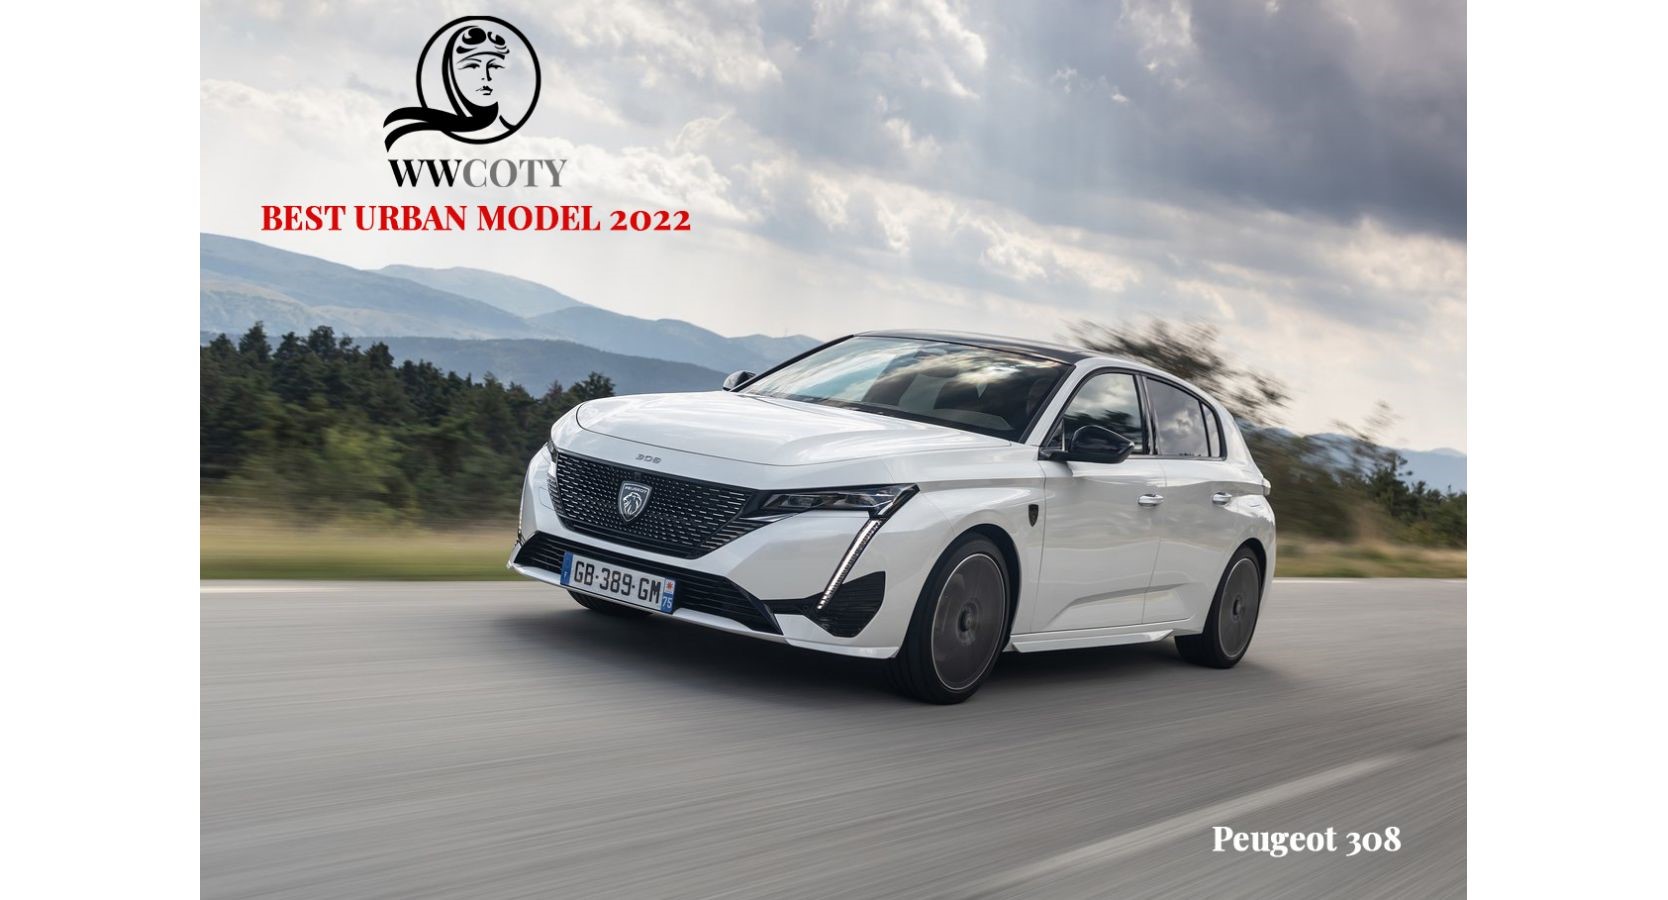 The new PEUGEOT 308, Women's World Car of the Year 2022 in the Urban Vehicle category